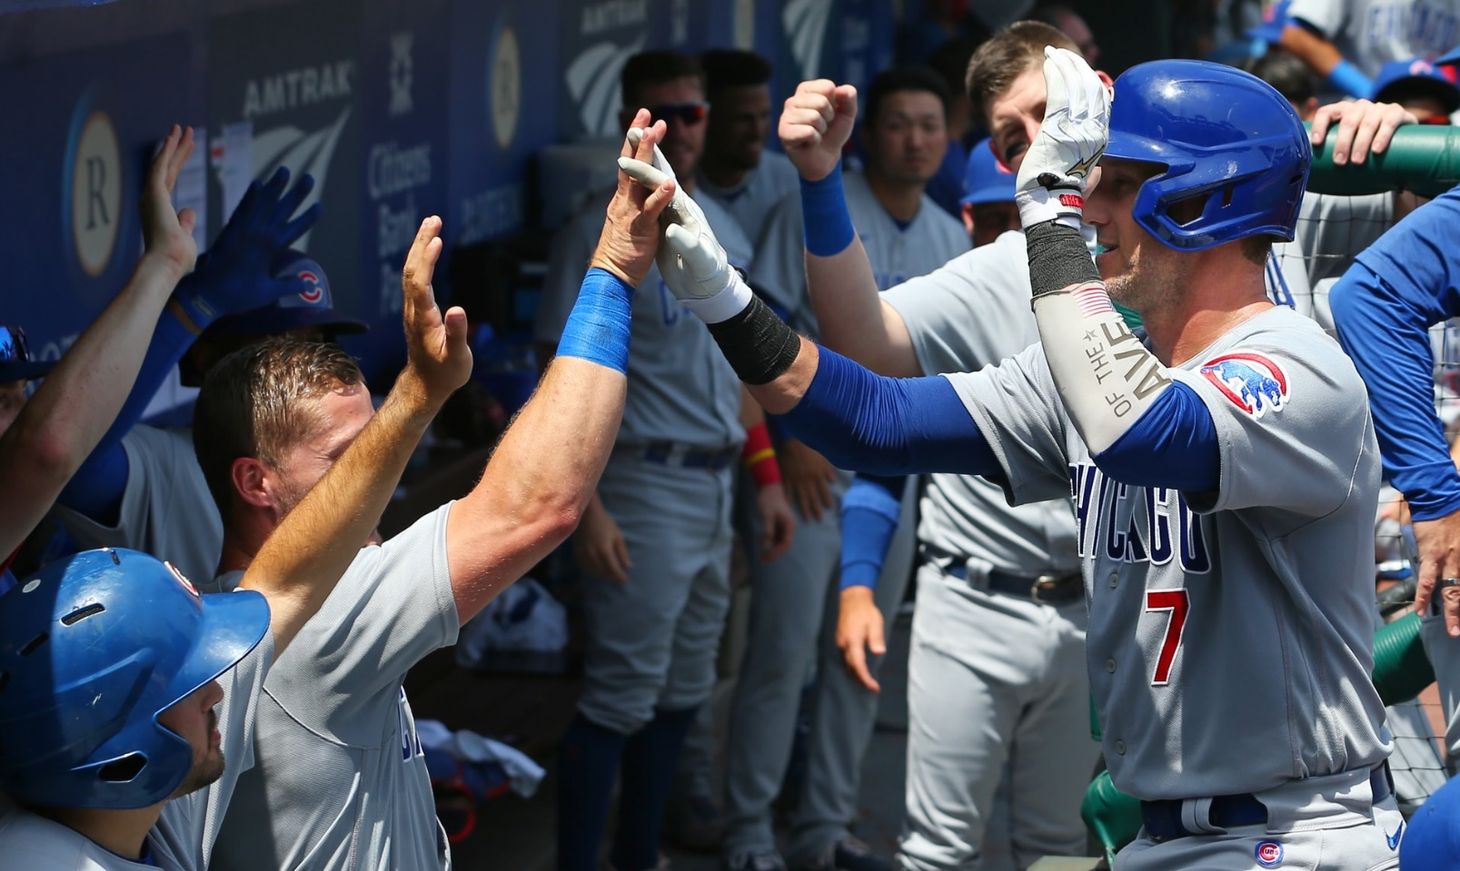 Cubs complete three-game sweep of Phillies